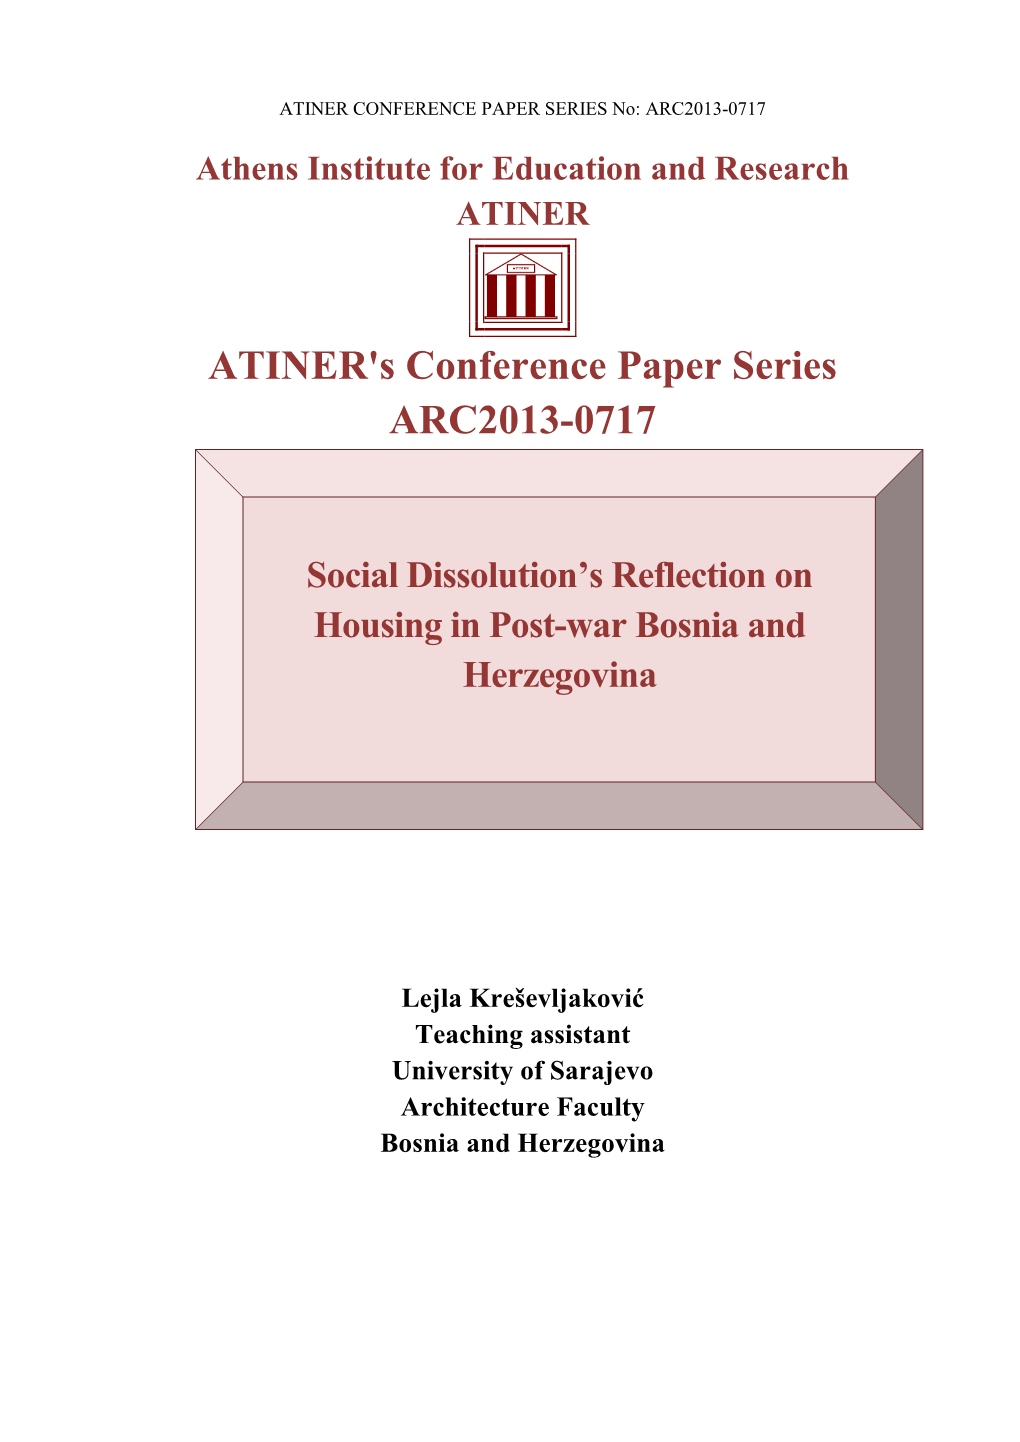 ATINER's Conference Paper Series ARC2013-0717